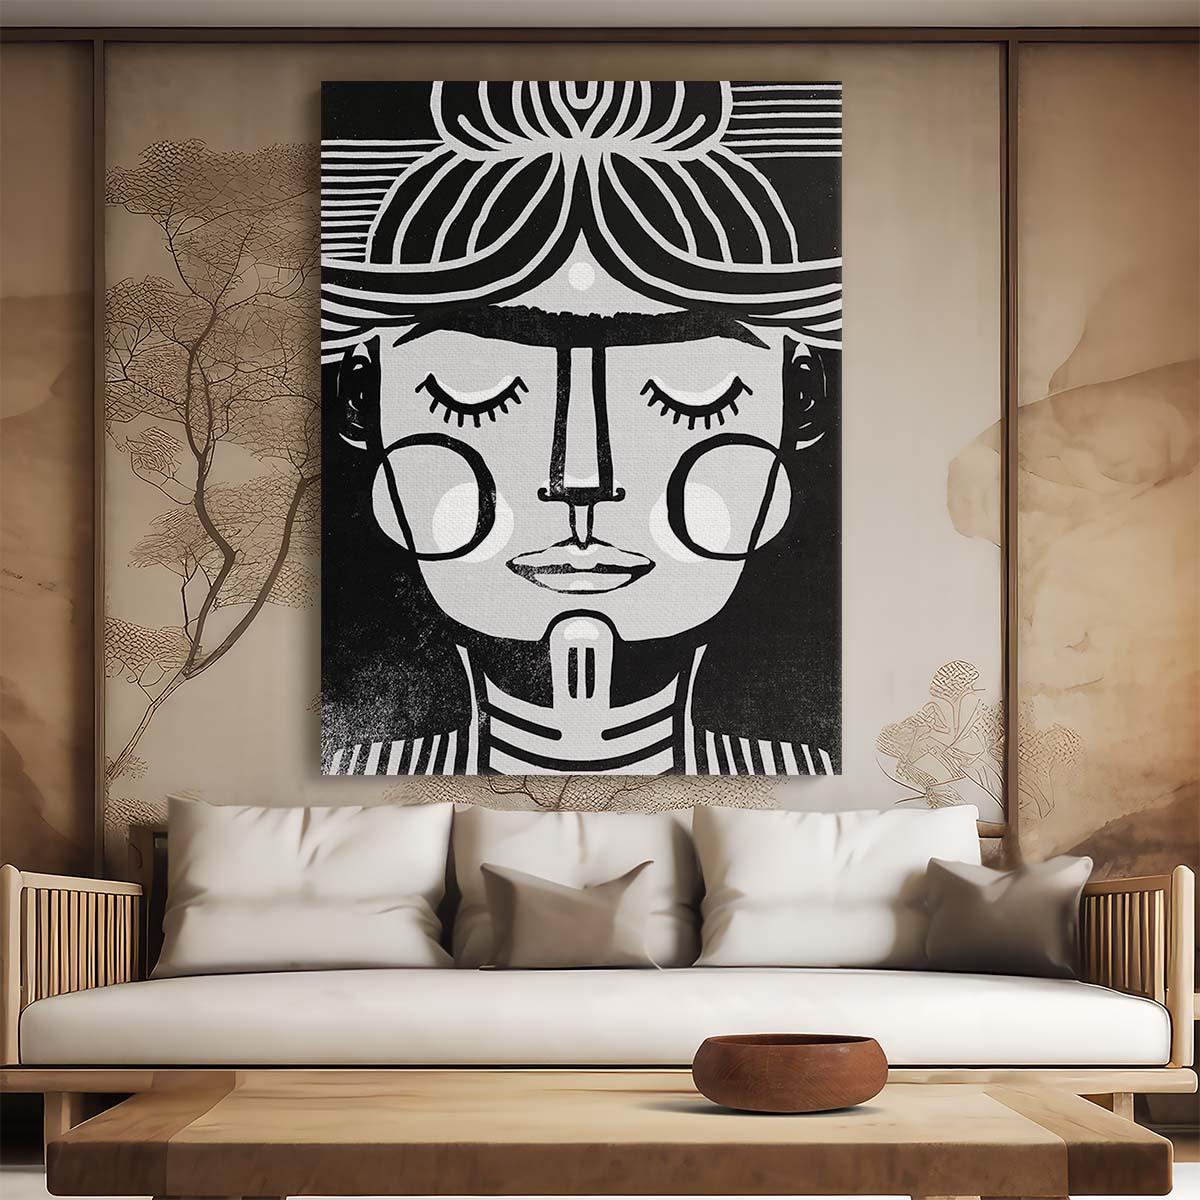 Frida Kahlo Dreaming Portrait, Monochrome Illustration Wall Art by Luxuriance Designs, made in USA